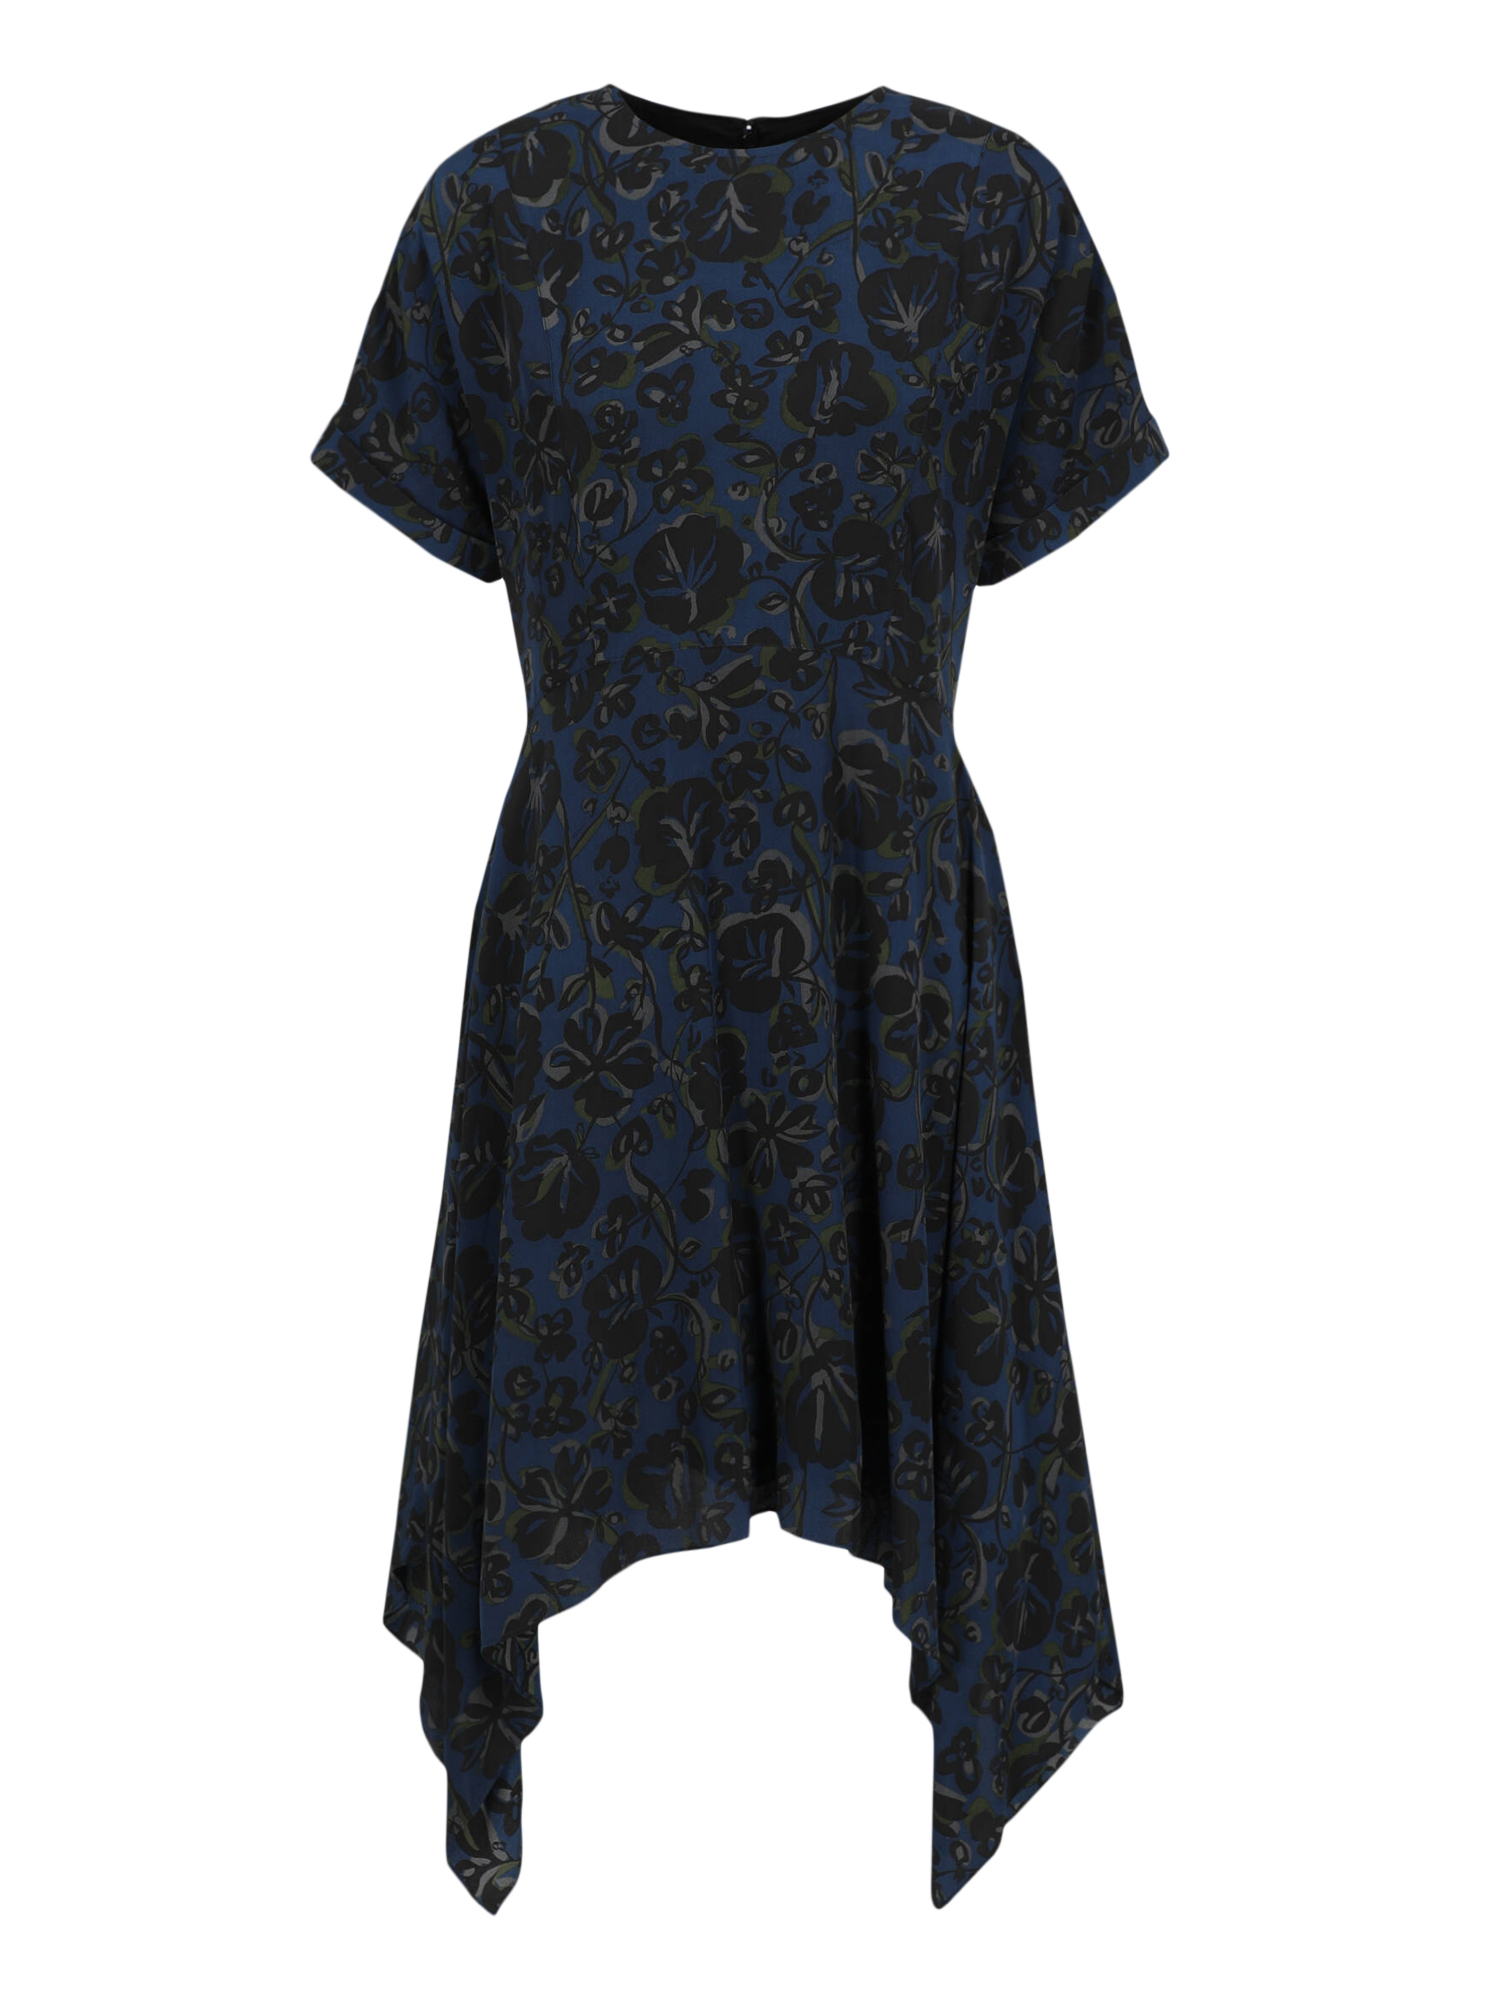 Condition: New With Tag, Floral Print Fabric, Color: Black, Navy, Silver - XS - IT 38 -